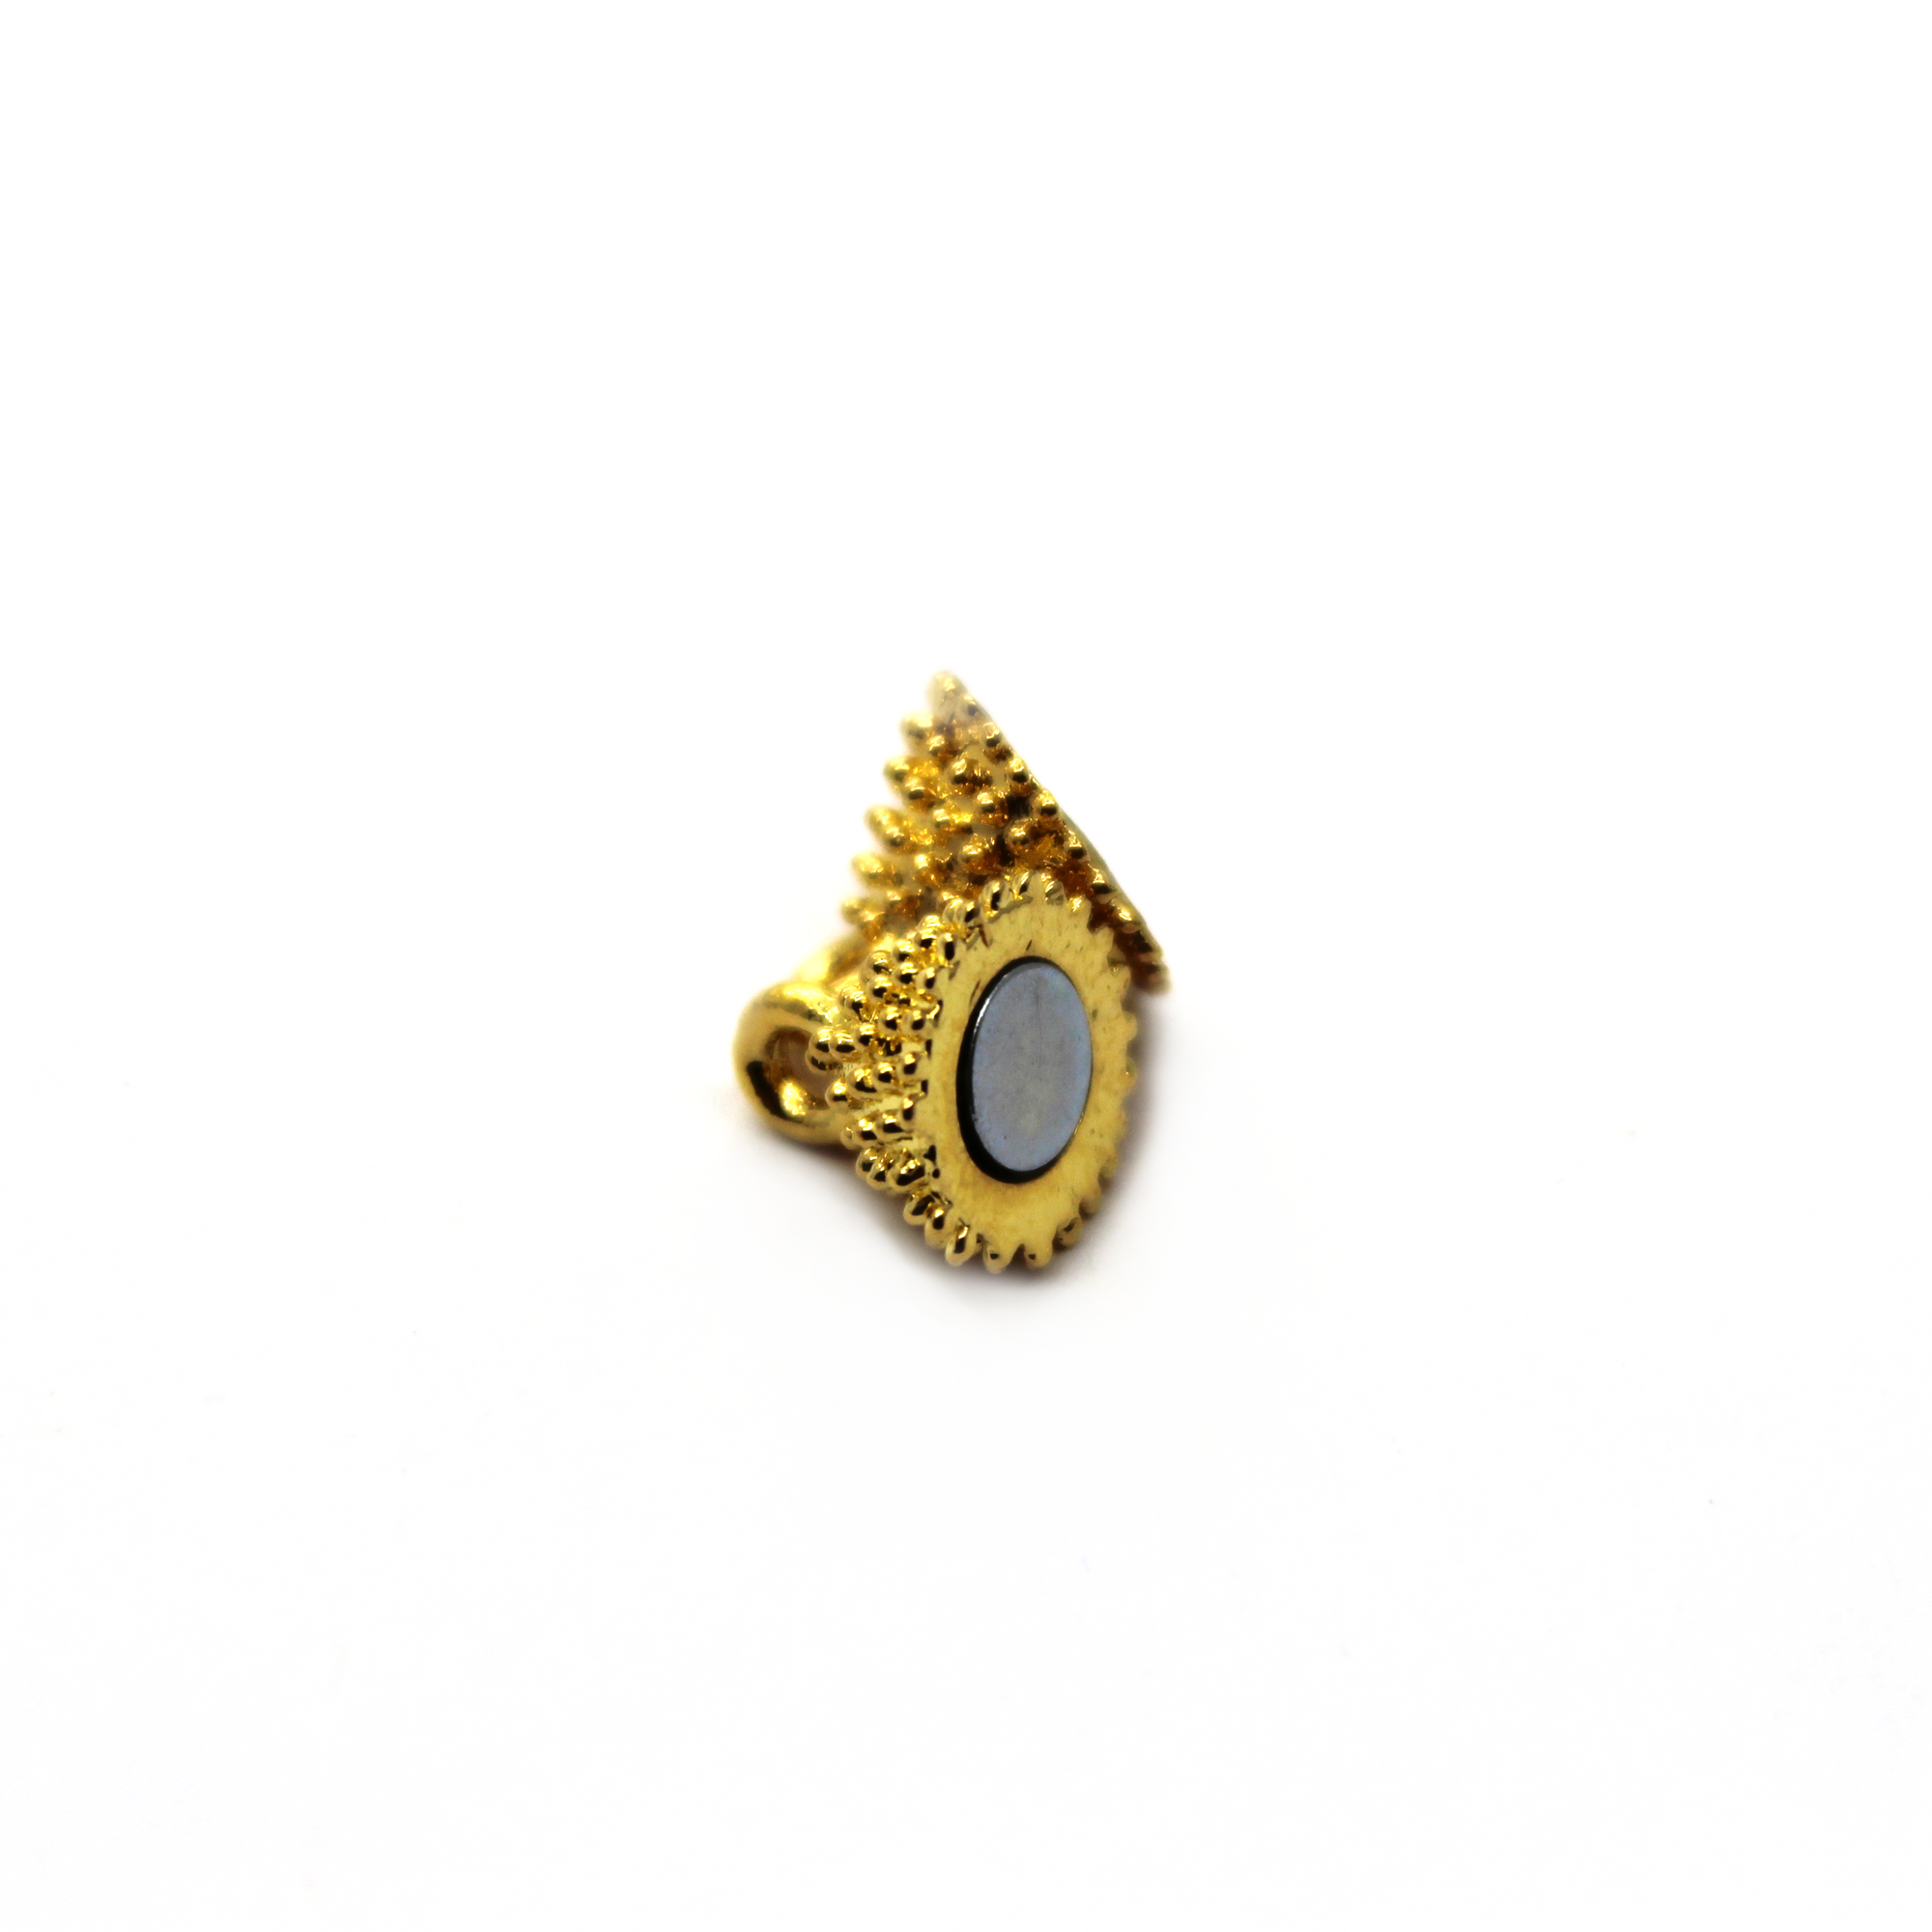 Clasp, Dotted Magnetic Oval Clasps, Gold, Alloy, 17mm x 9mm, Sold Per pkg of 1